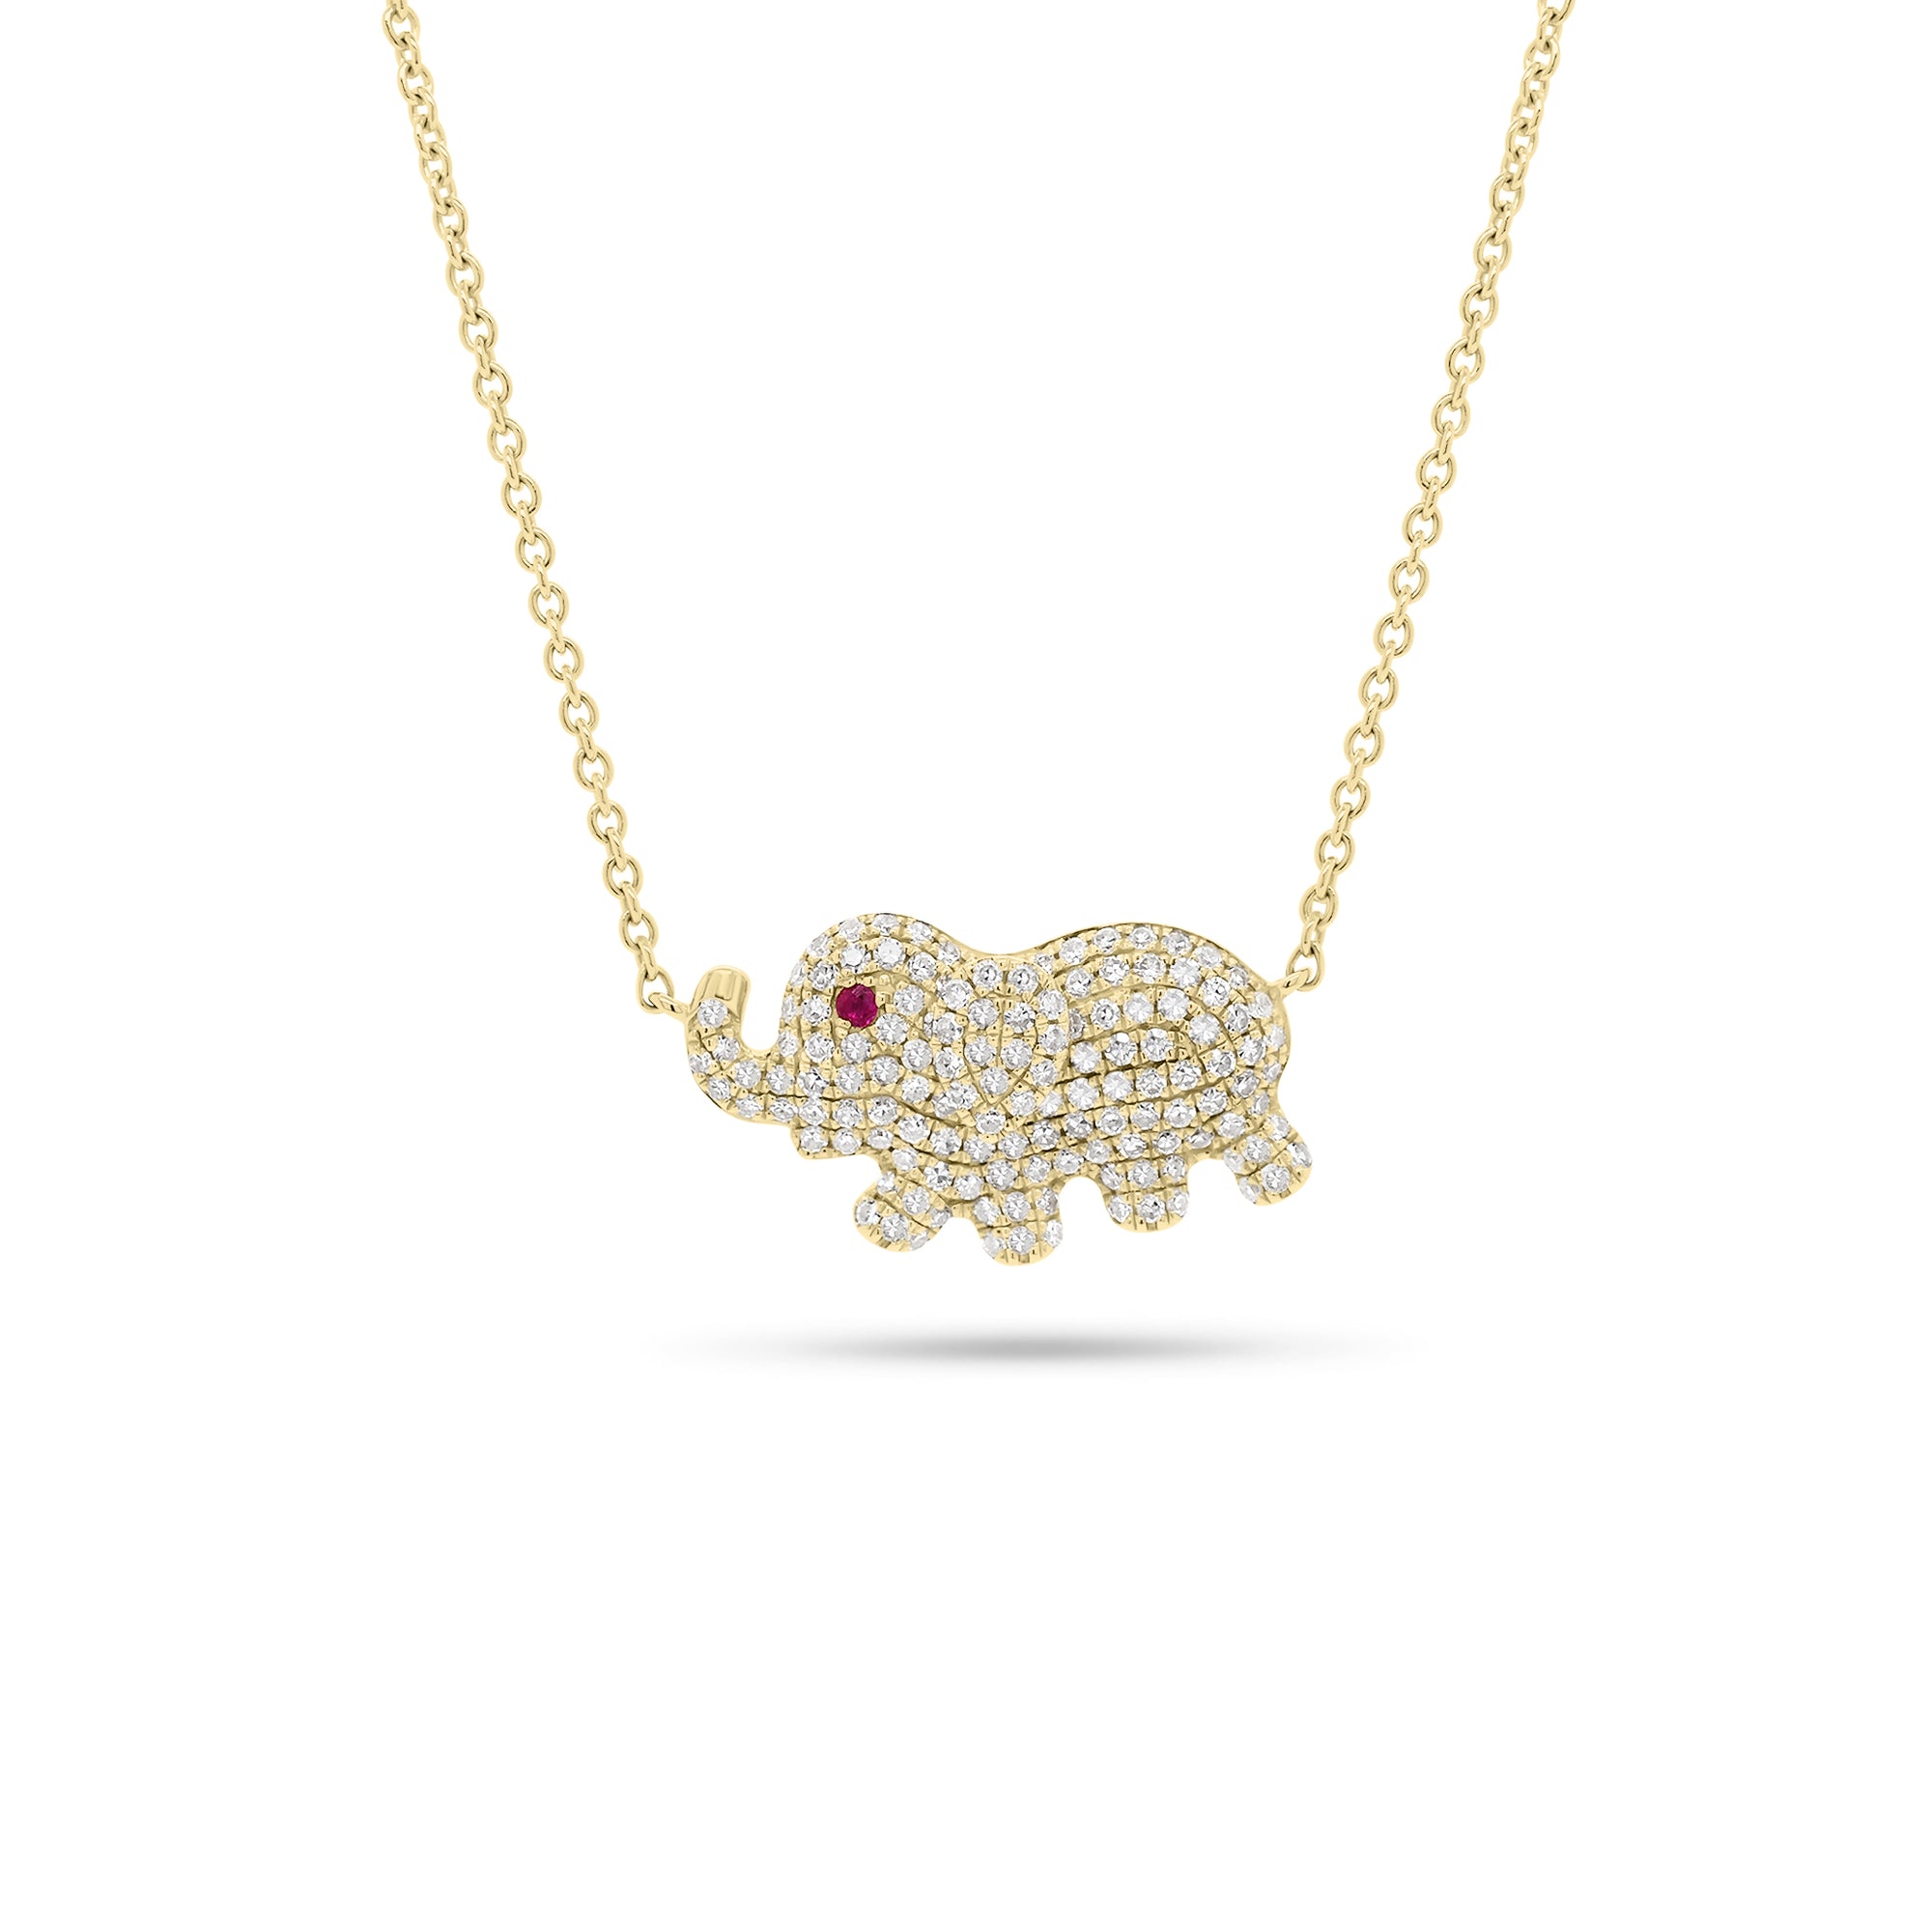 Pave Diamond Elephant Pendant Necklace  -14k yellow gold weighing 3.30 grams  -145 round diamonds weighing 0.48 carats  -1 ruby weighing 0.02 carats